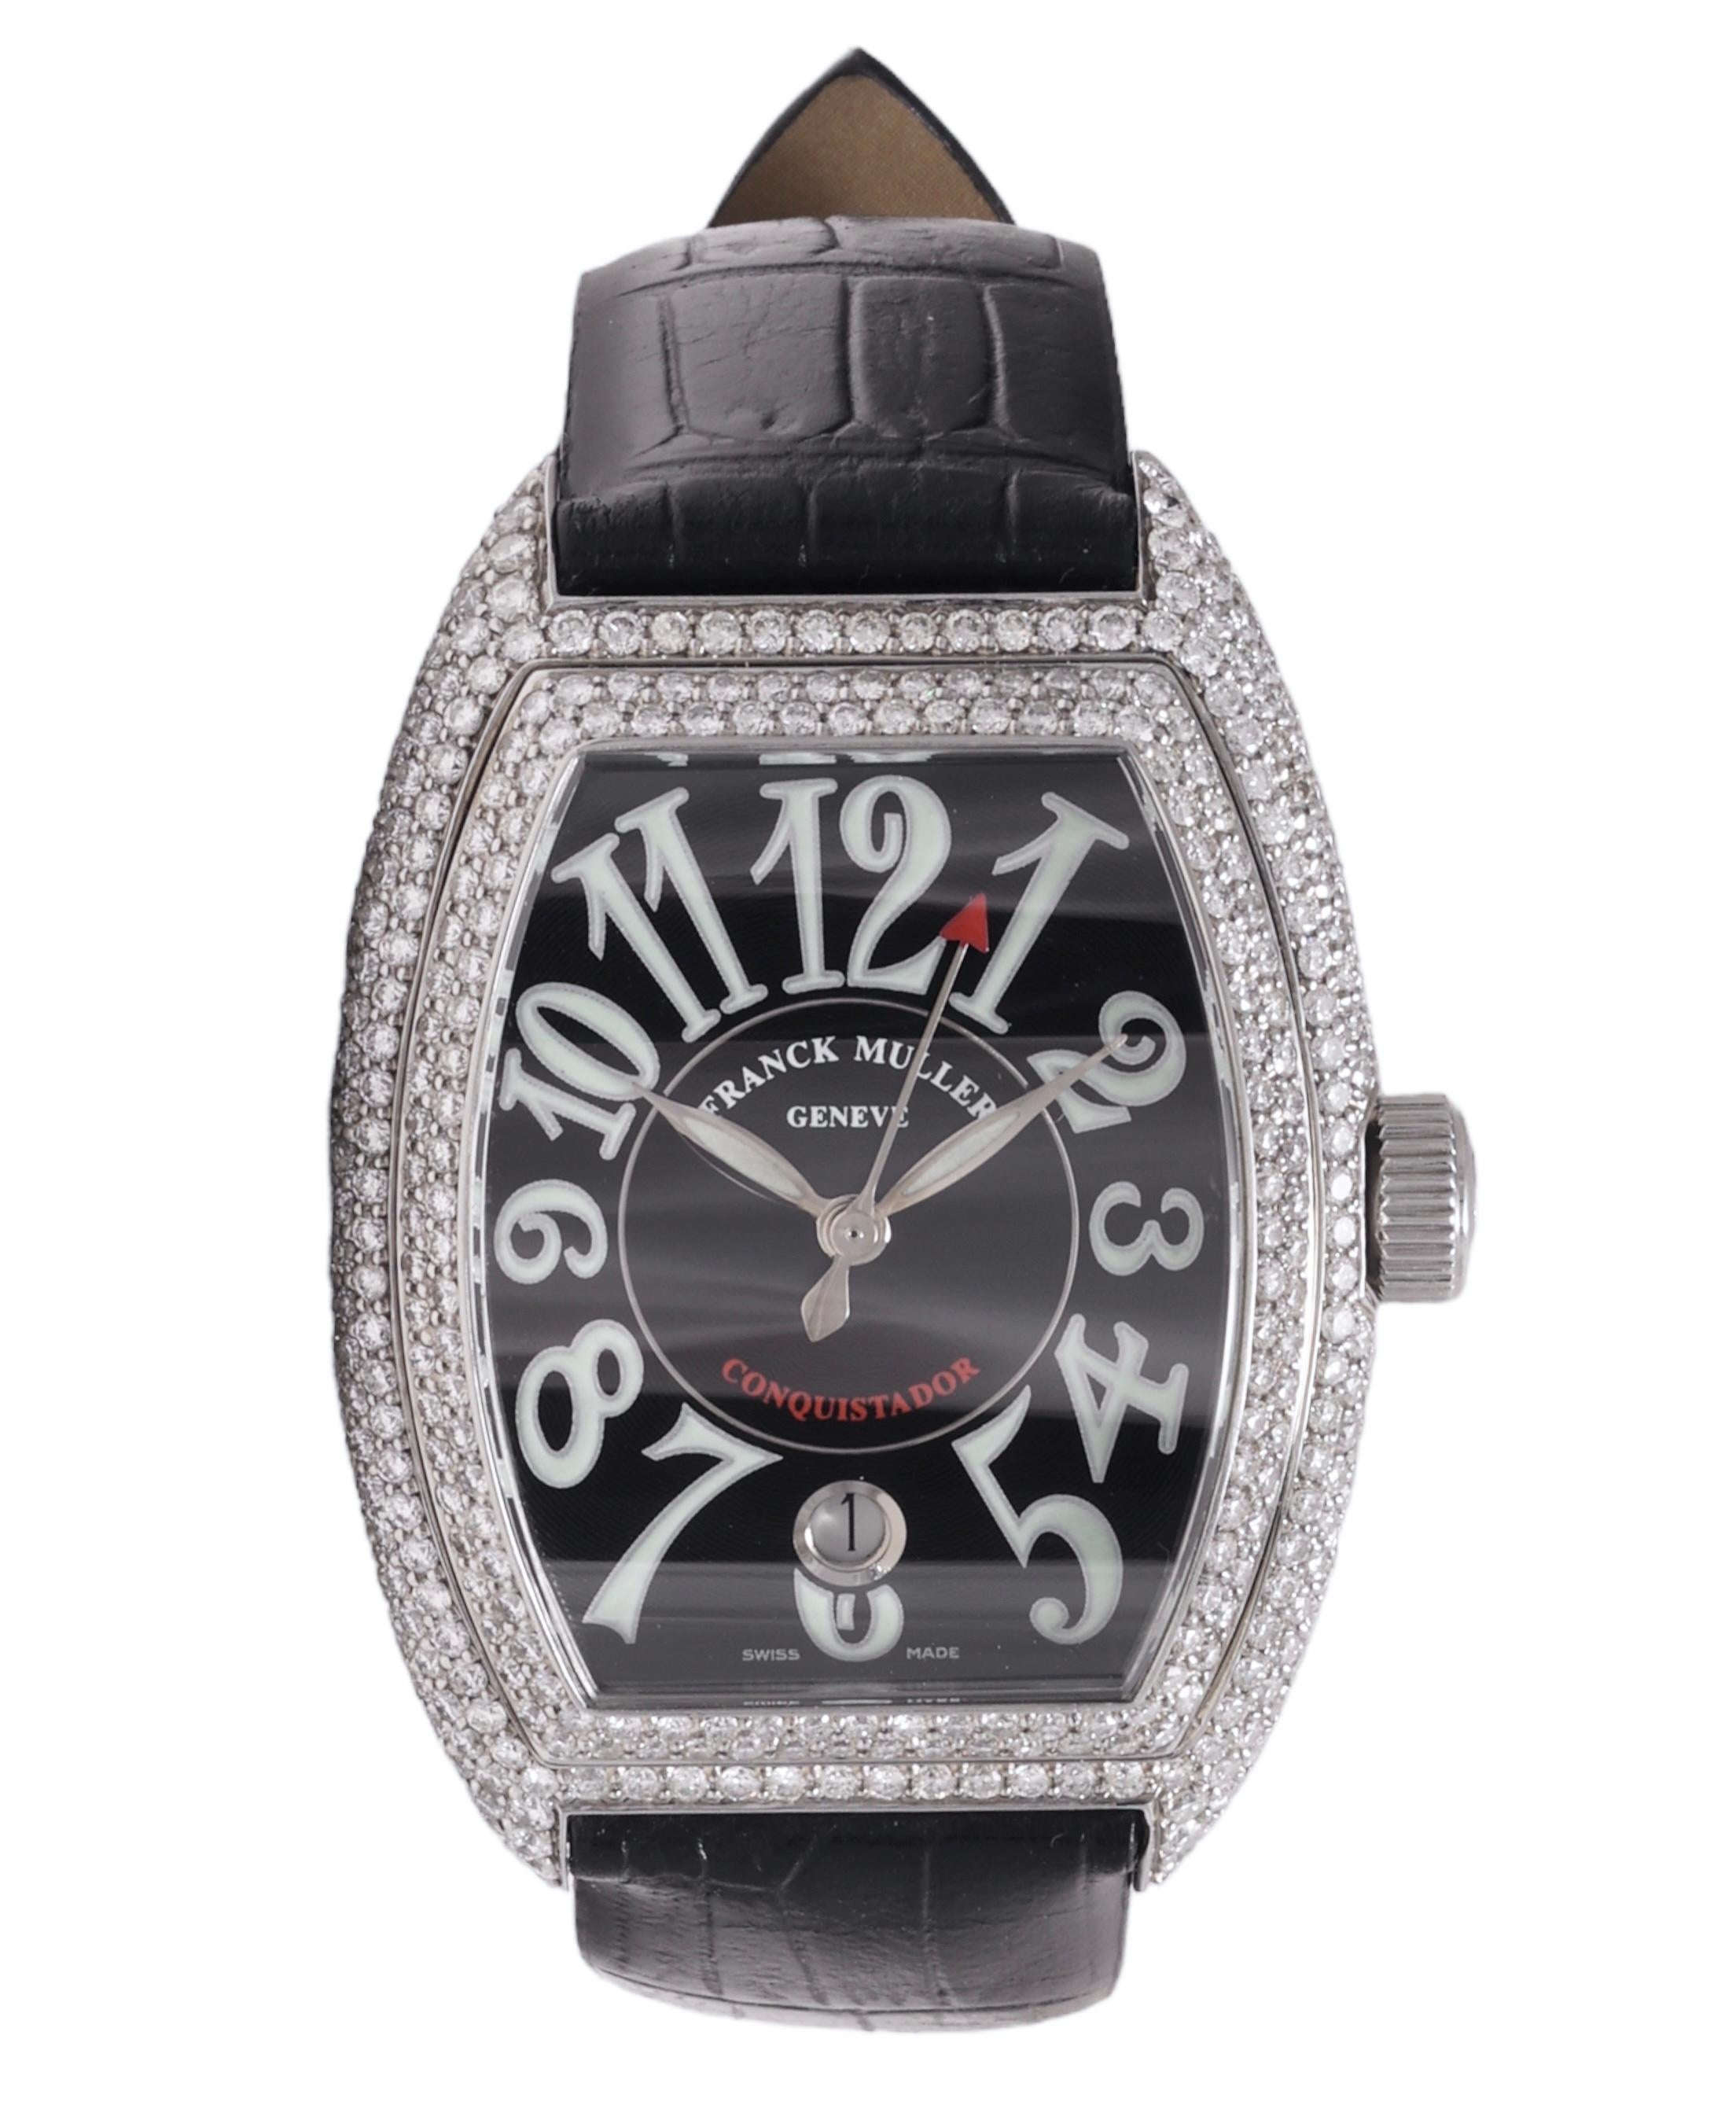 Franck Muller Diamonds Conquistador Automatic Wristwatch Ref. 8001 SC Full Set In Excellent Condition For Sale In Antwerp, BE